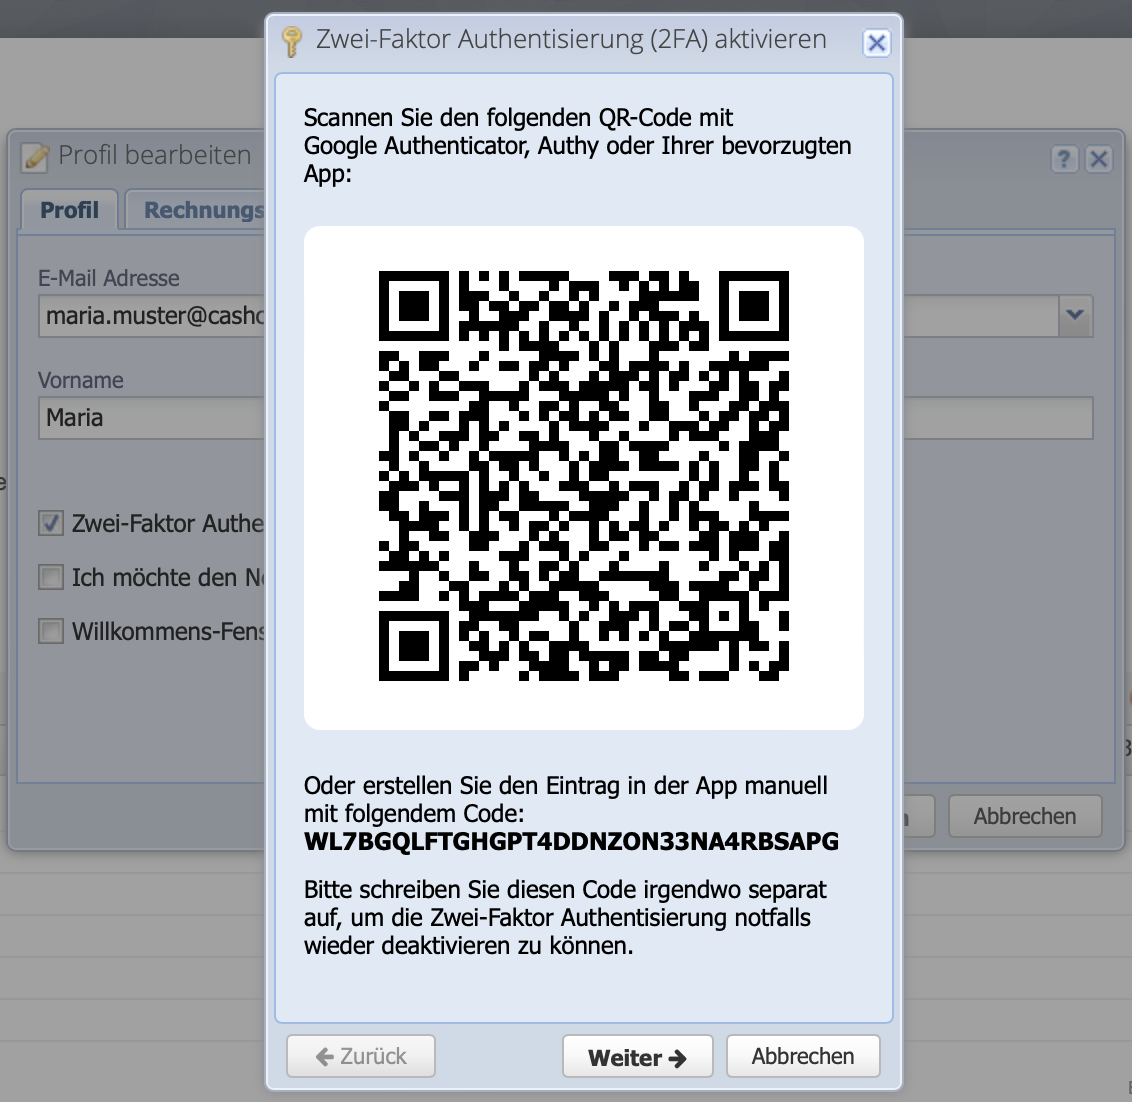 Screenshot of the two-factor authentication setup with QR code